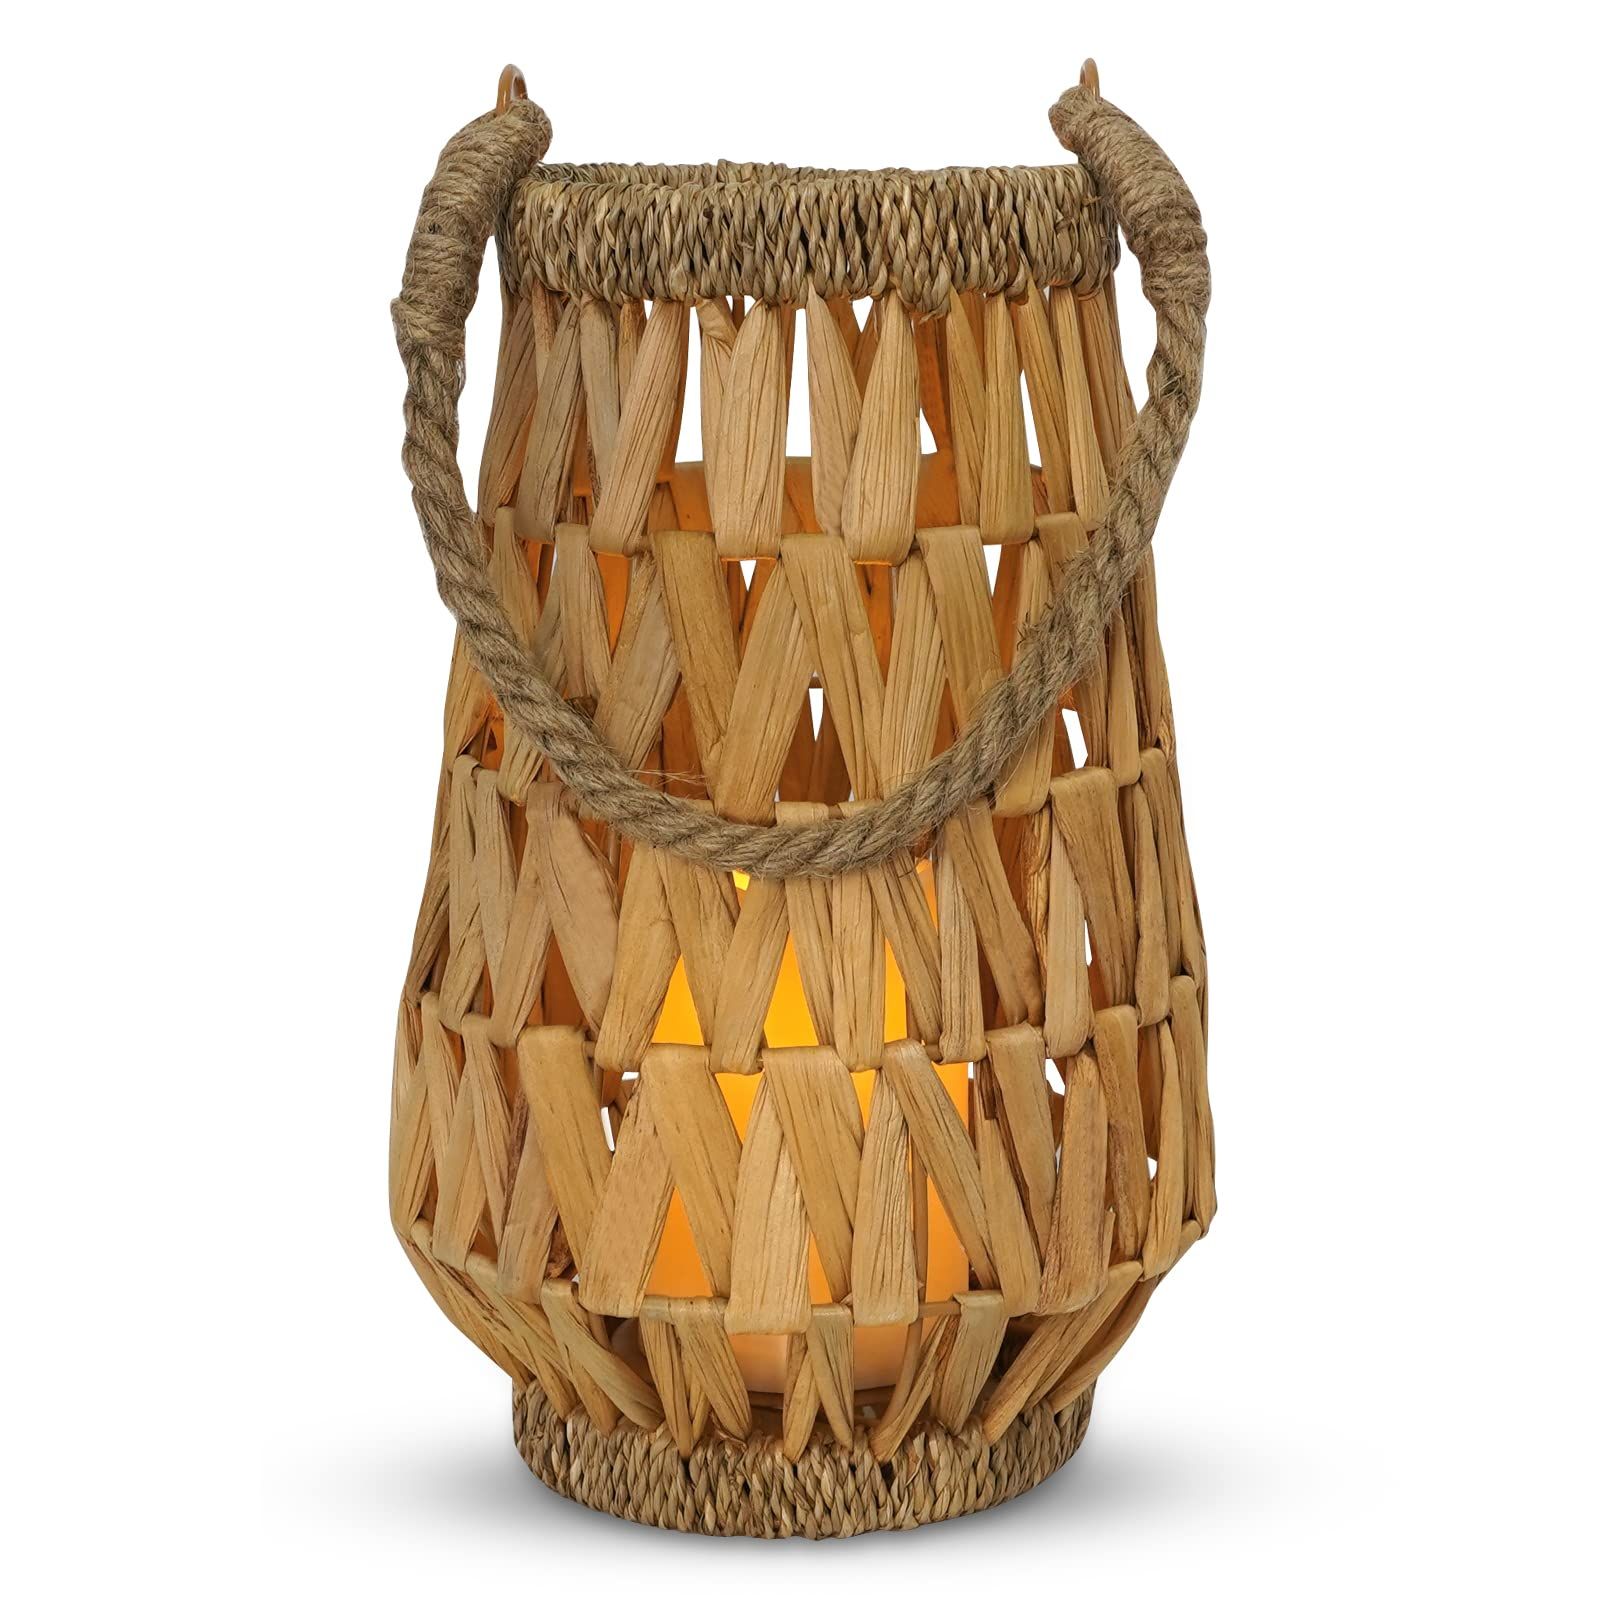 SHYMERY Rattan Lantern with 6 Hours Timer Candles,20 Inch Natural Woven Bamboo Lantern,Hanging Wicke | Amazon (US)